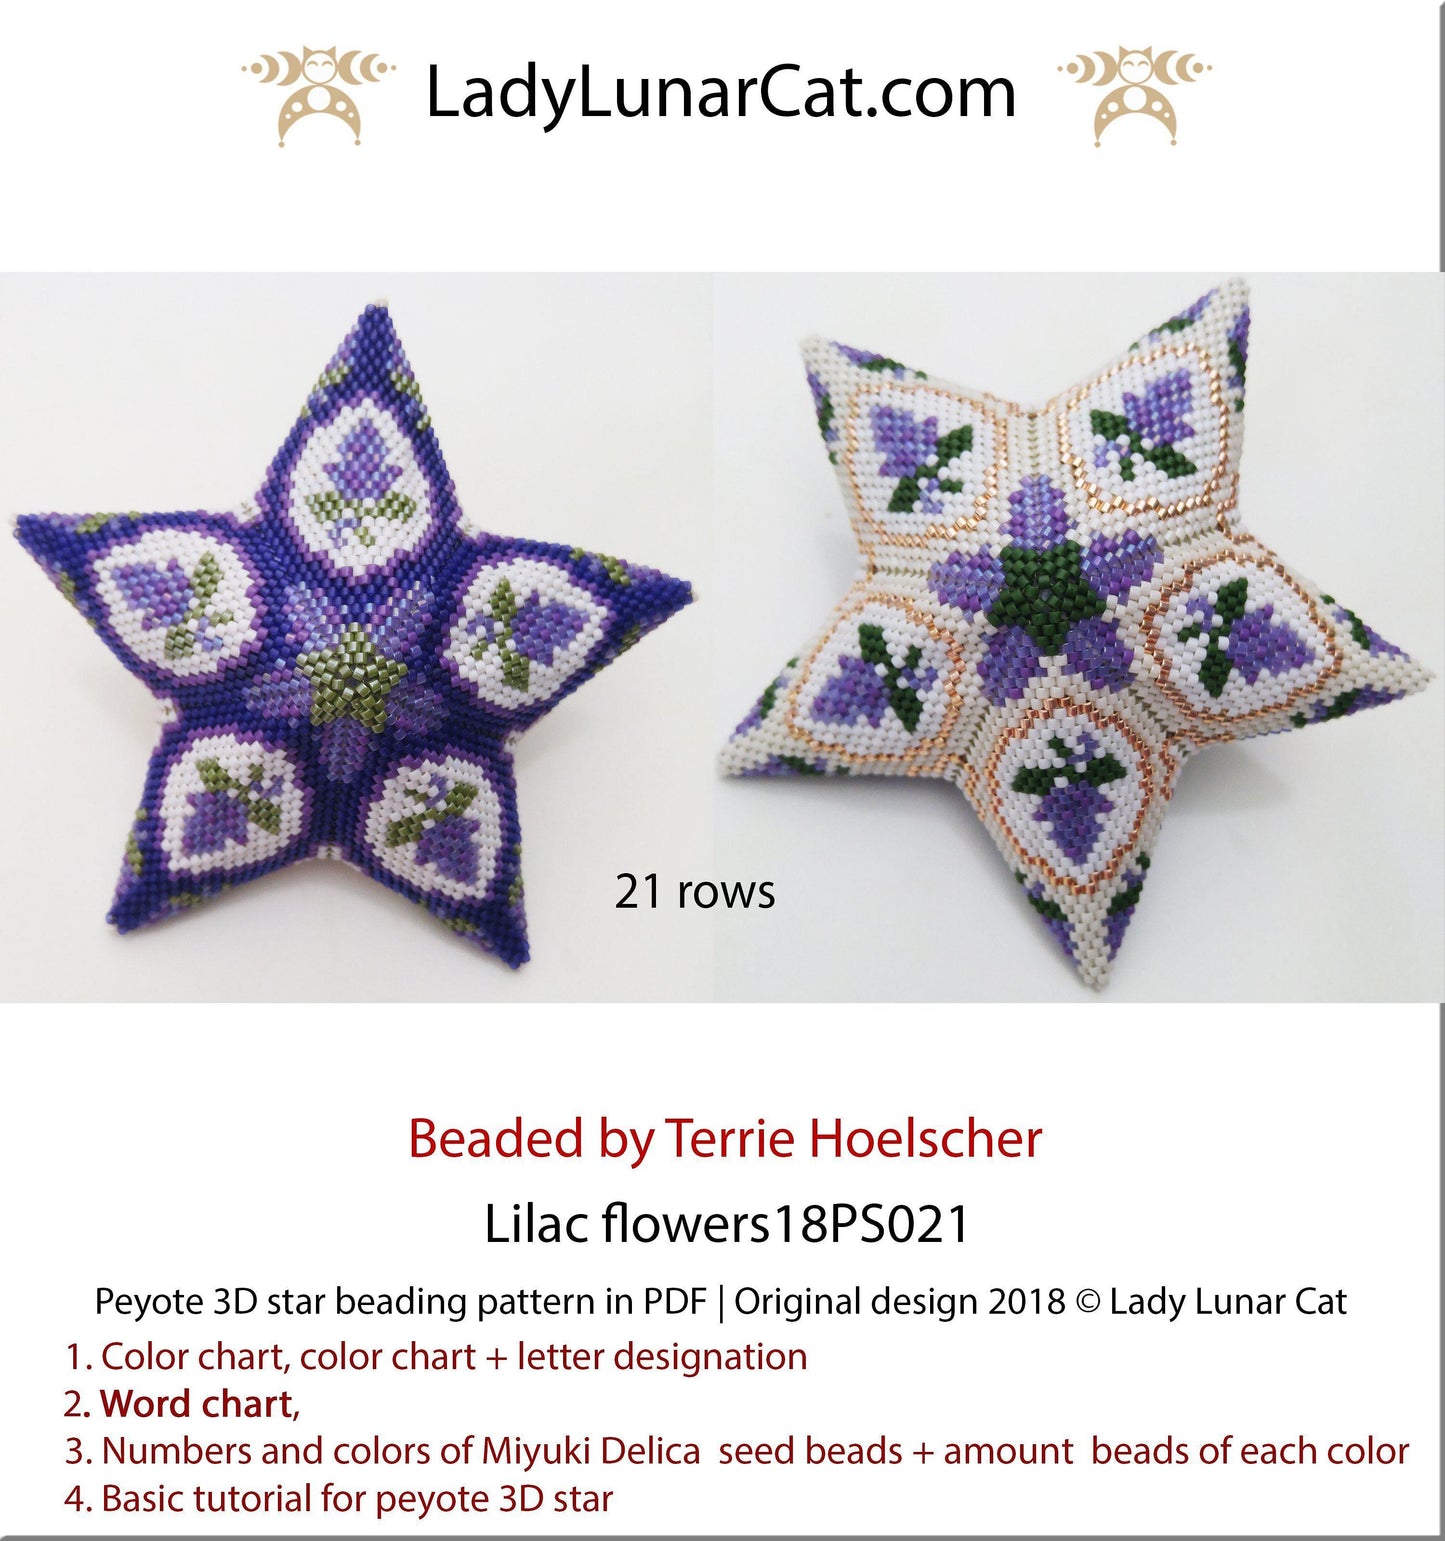 3d peyote star patterns for beading Lilac flowers 18PS021 LadyLunarCat